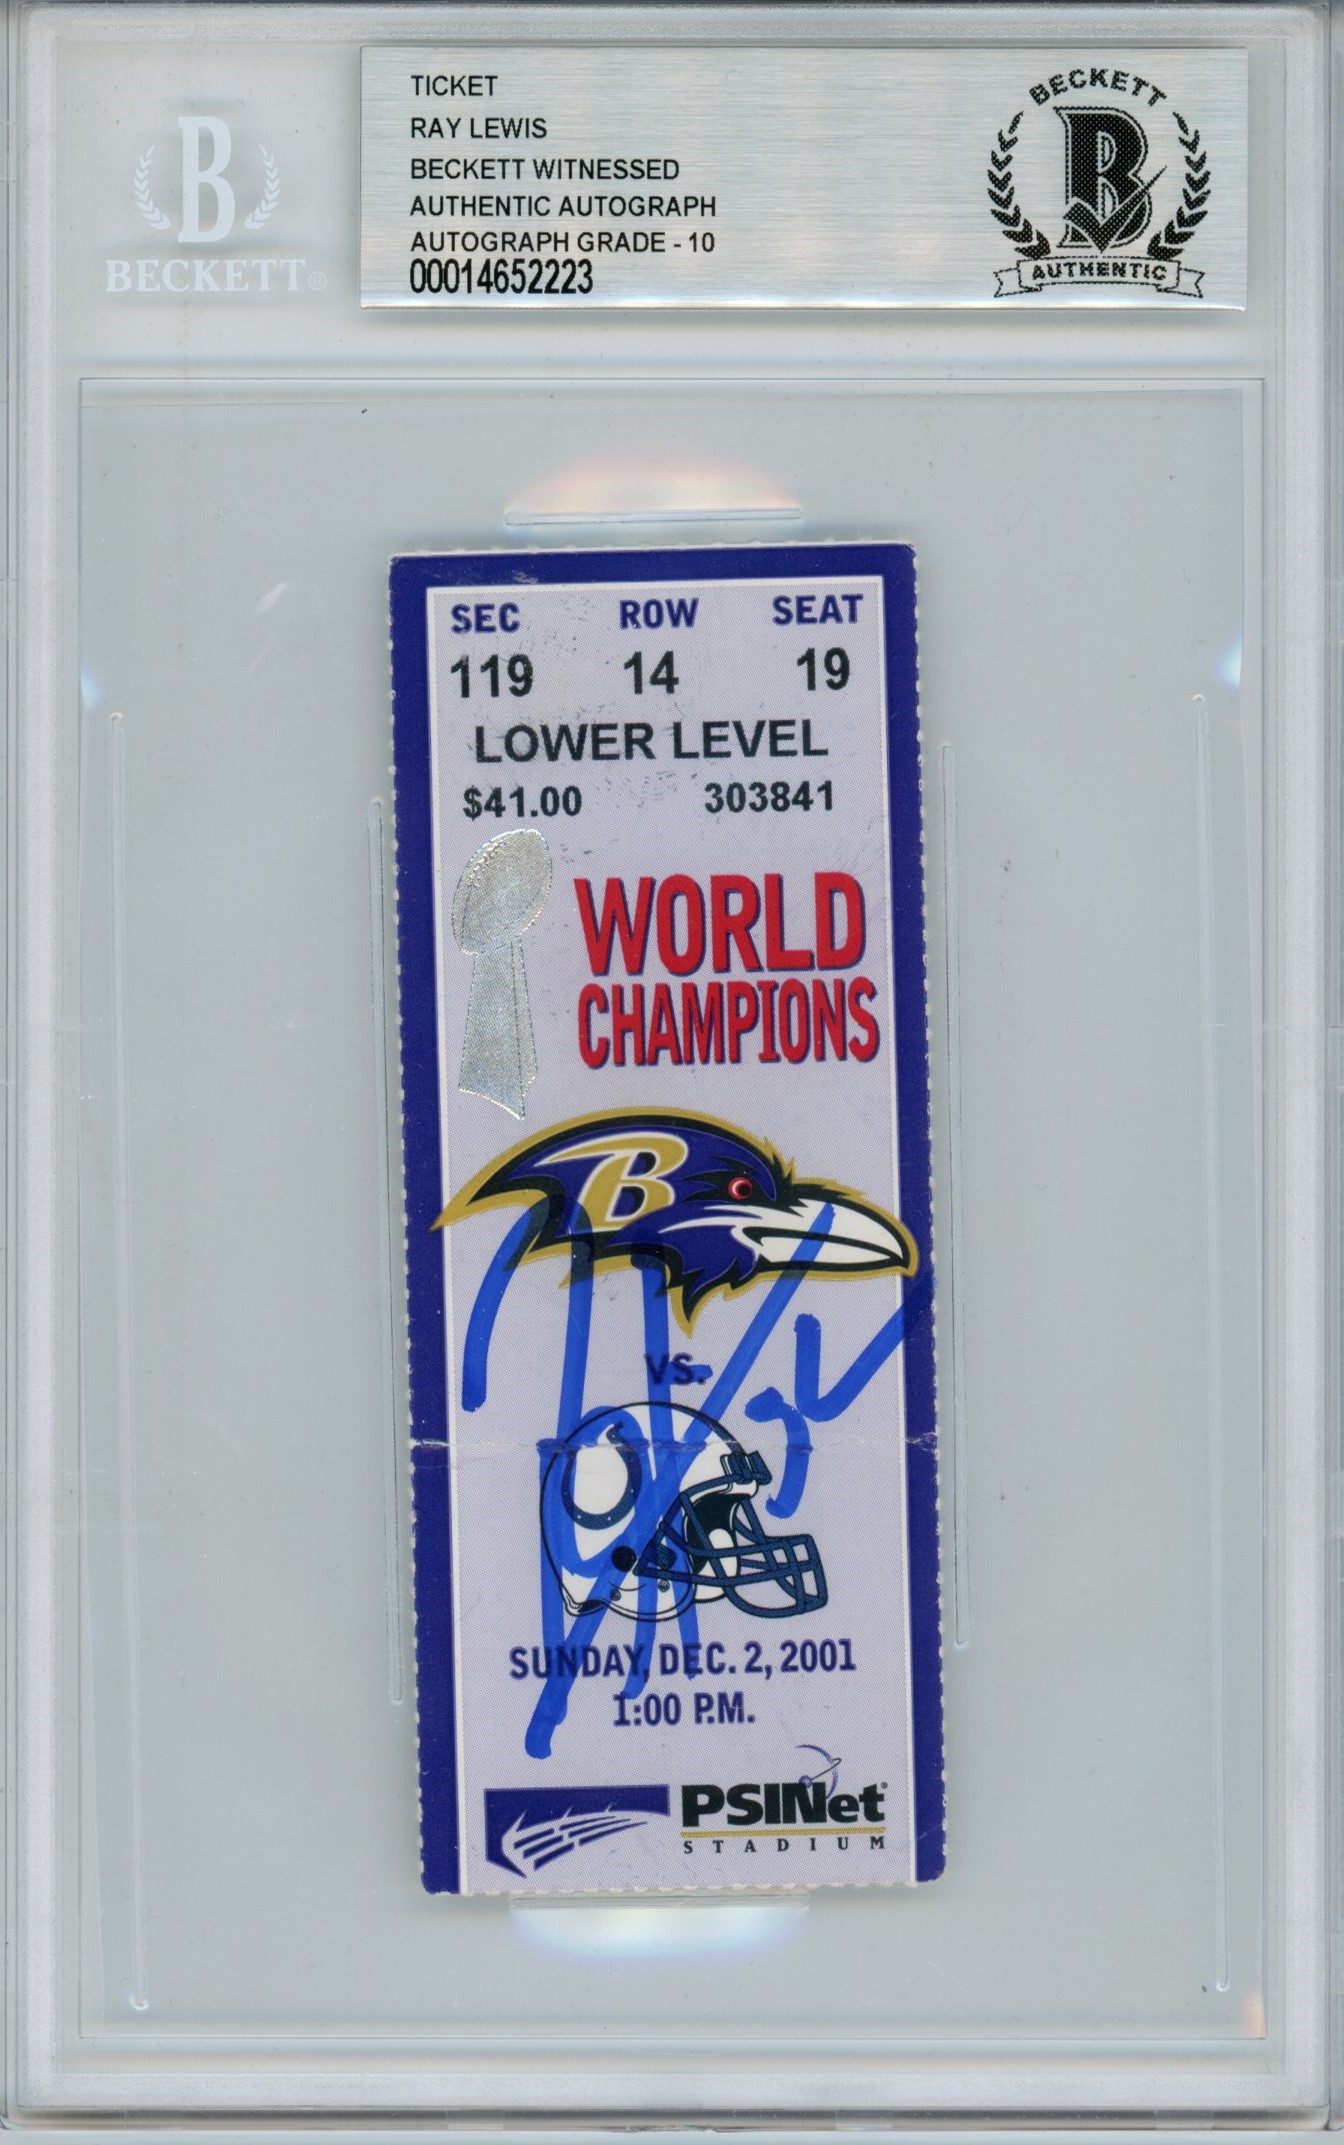 Ray Lewis Signed Baltimore Ravens Ticket 12/2/01 vs Colts BAS Slab